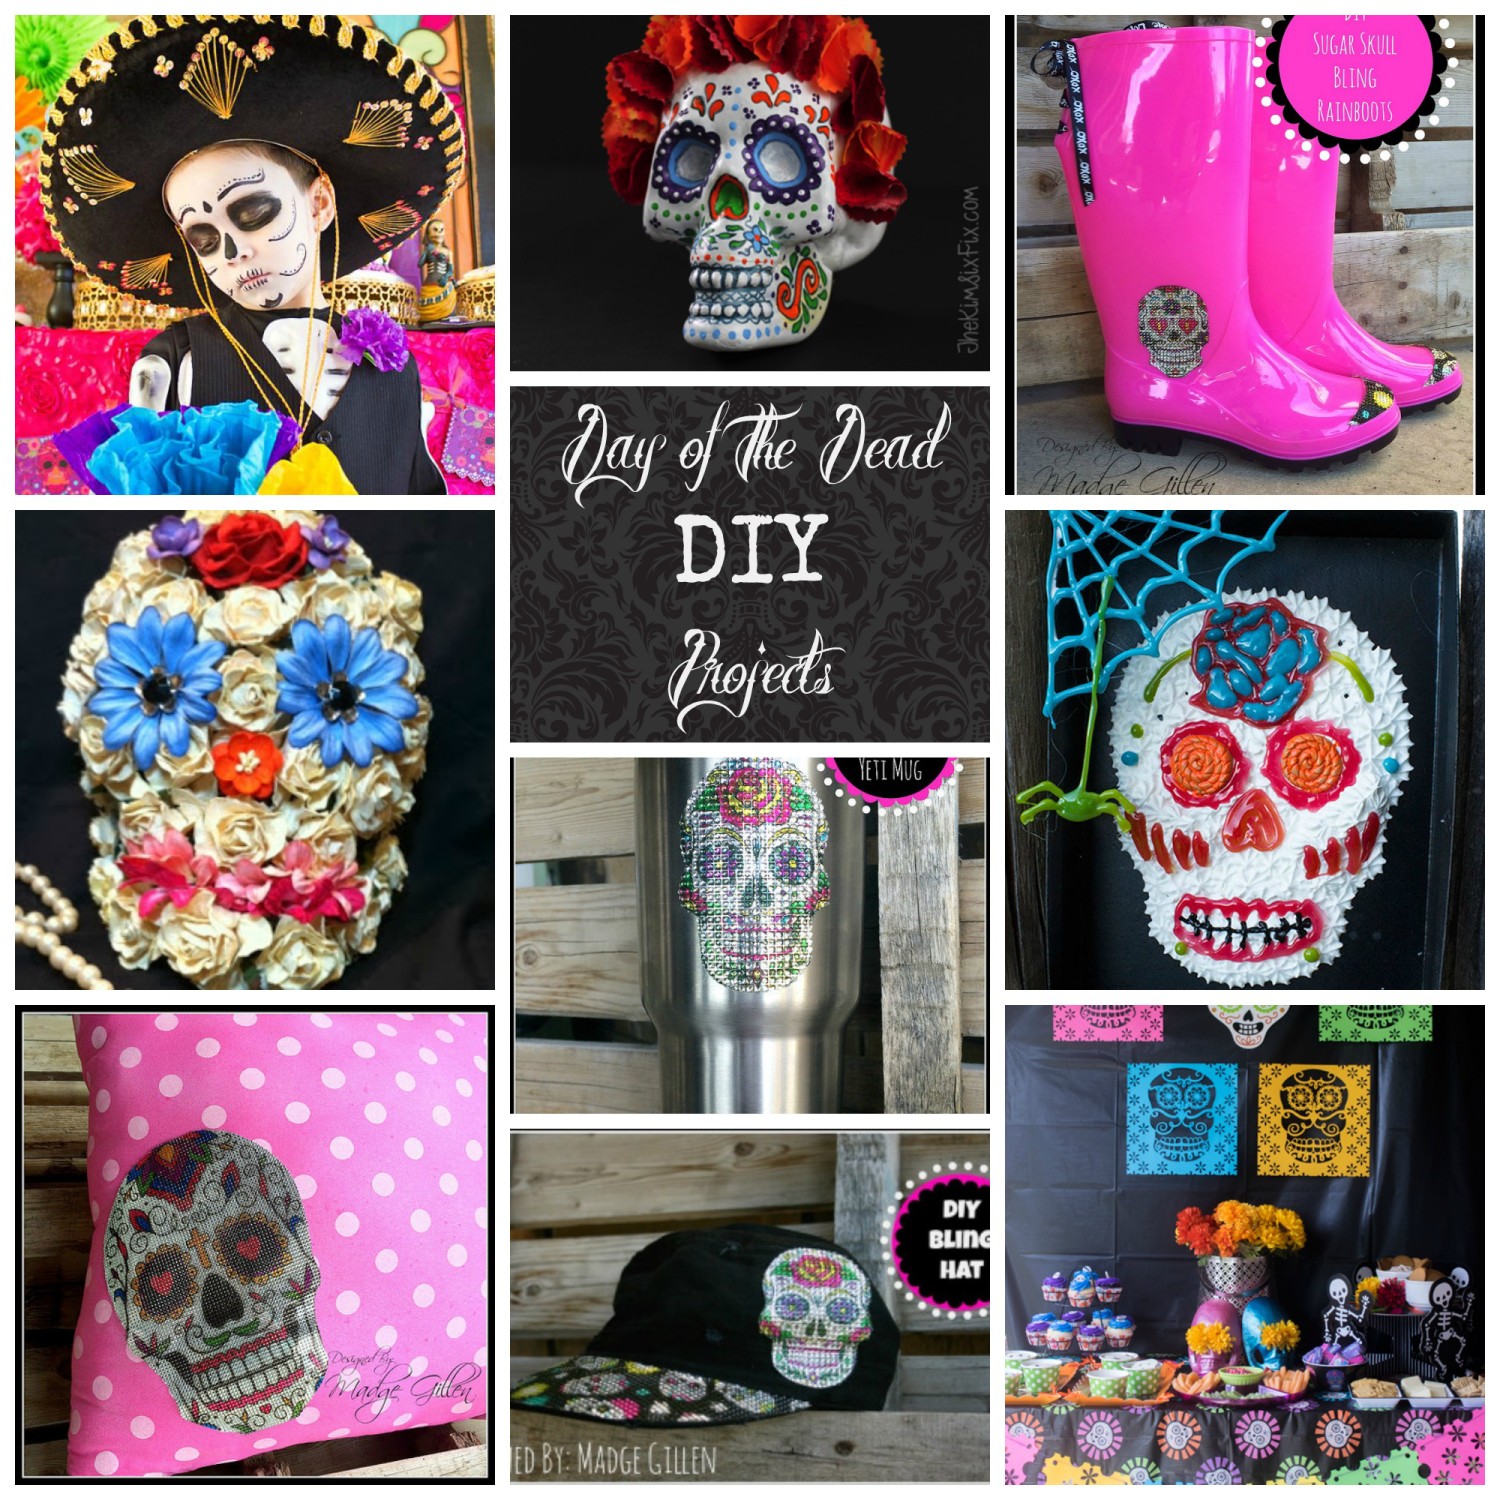 Day of the Dead collage